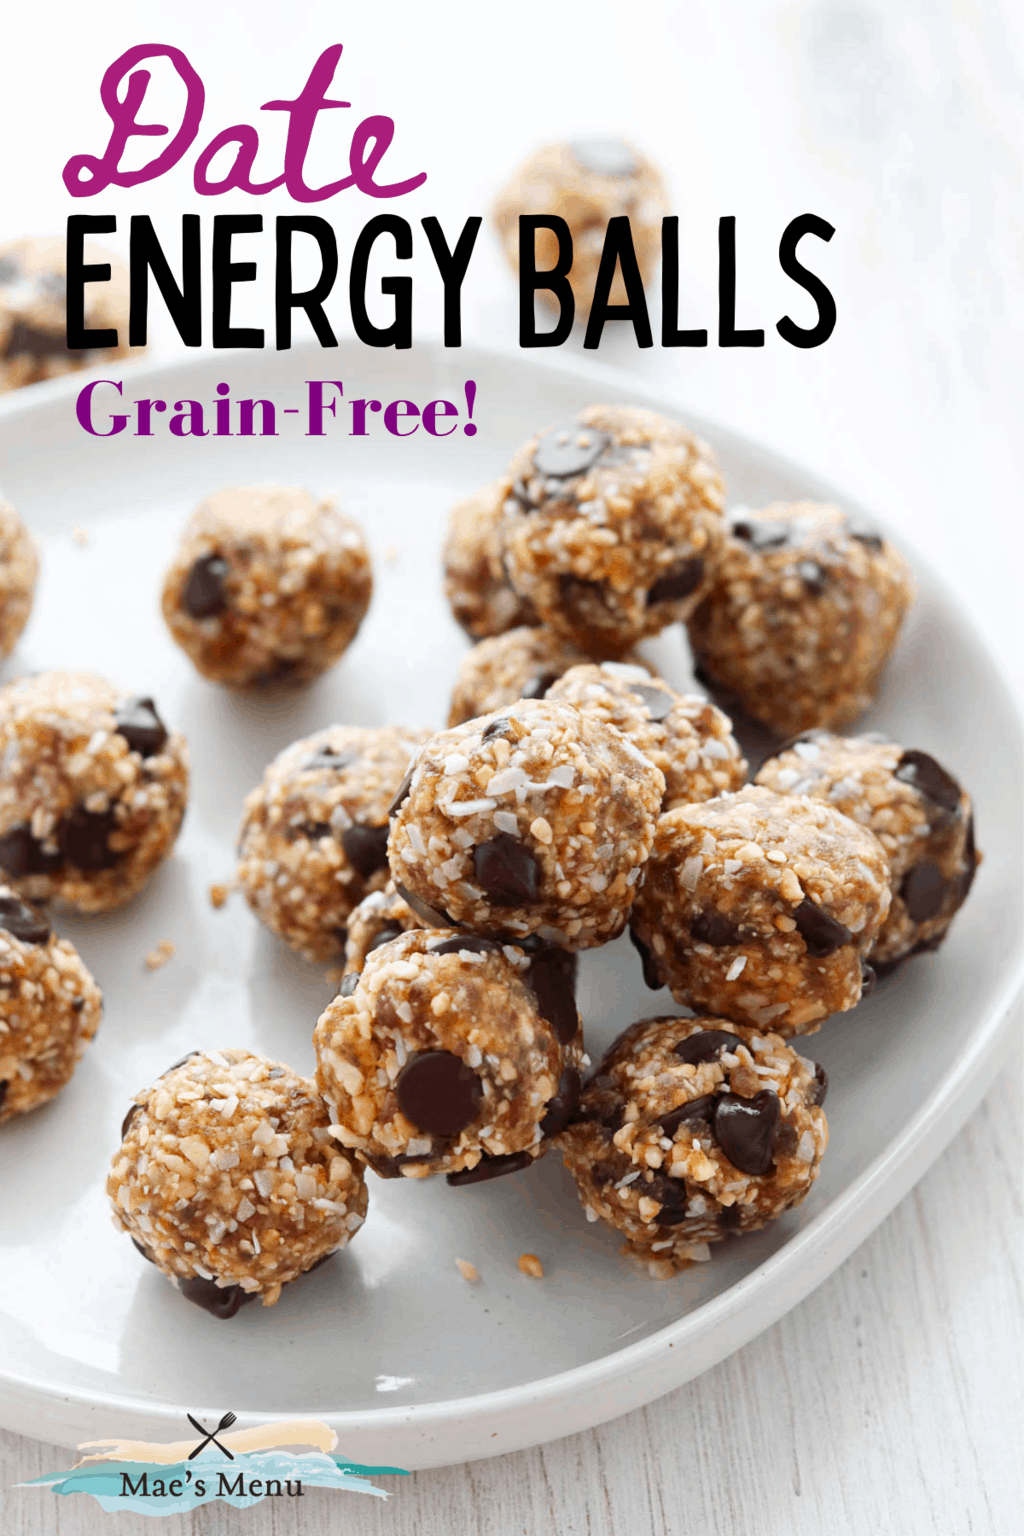 A pinterest pin for date energy balls with a side shot of a plate of the date balls.